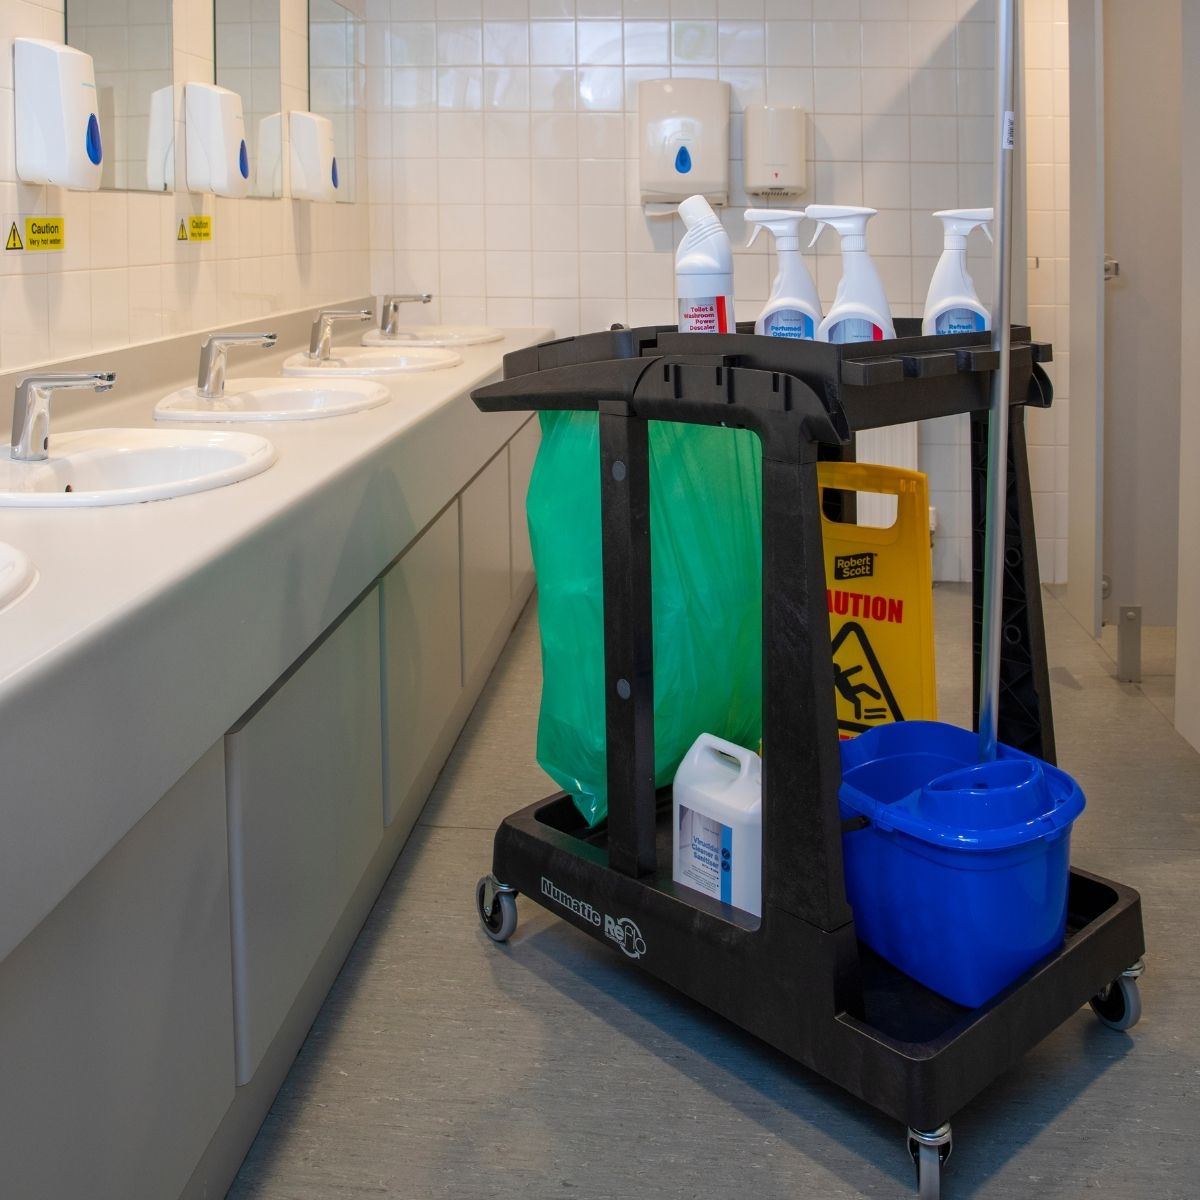 cleaners trolley with cleaning chemicals